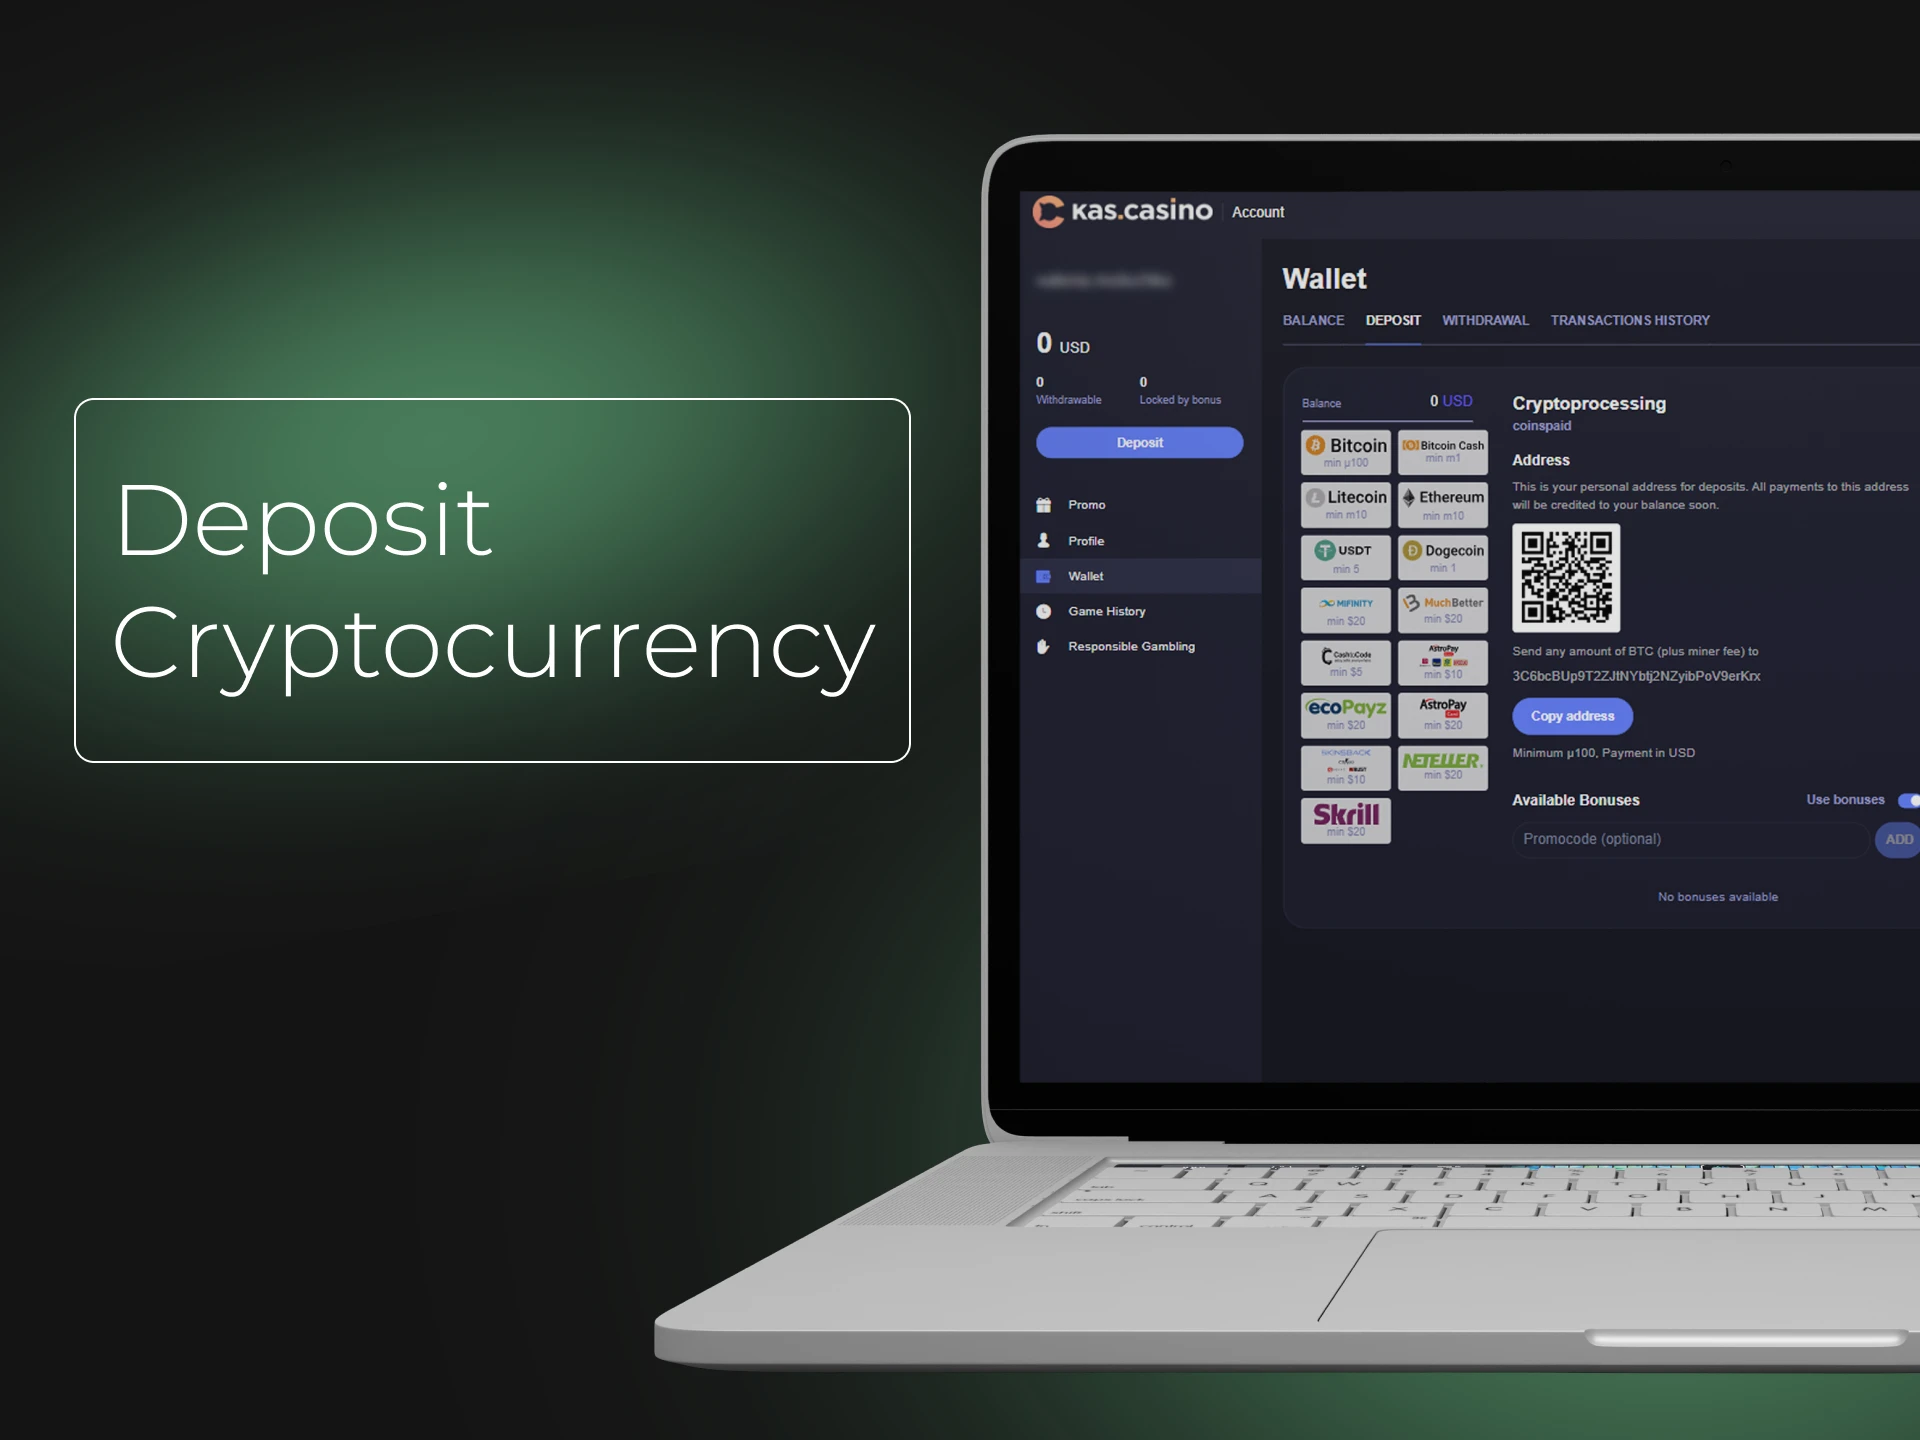 Deposit cryptocurrency into your casino account.